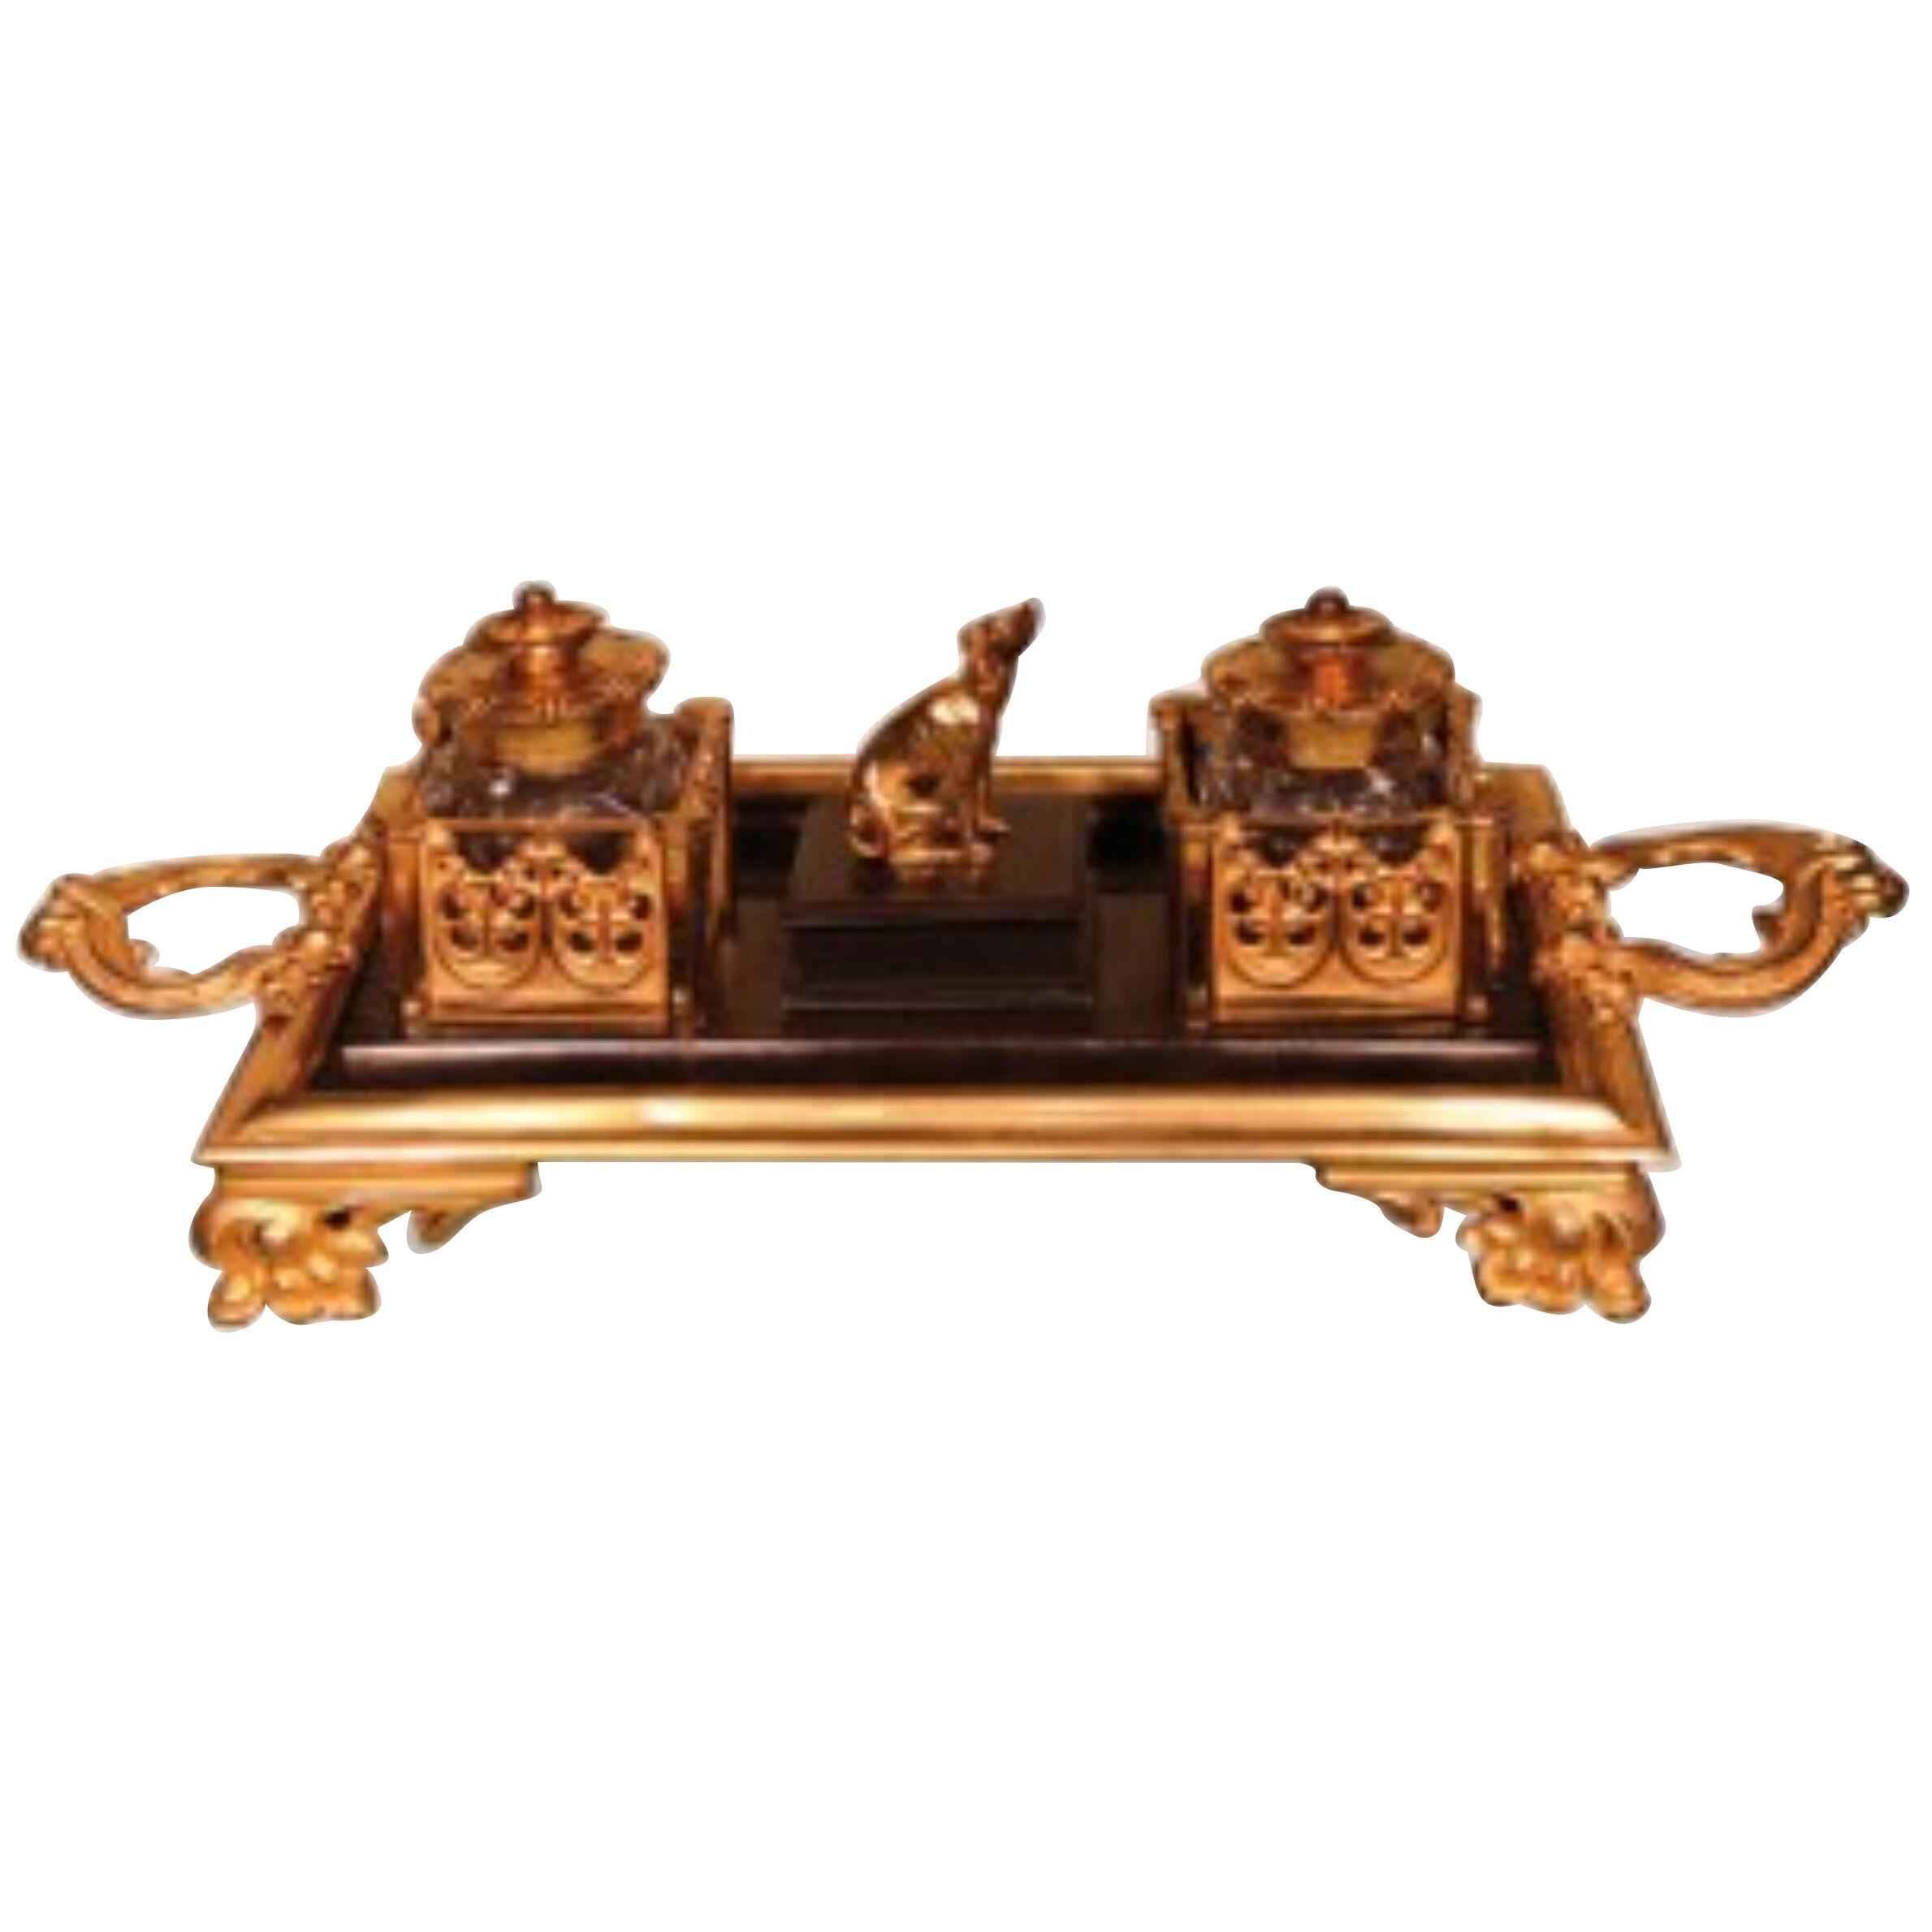 A large 19th century bronze and ormolu Pen-tray